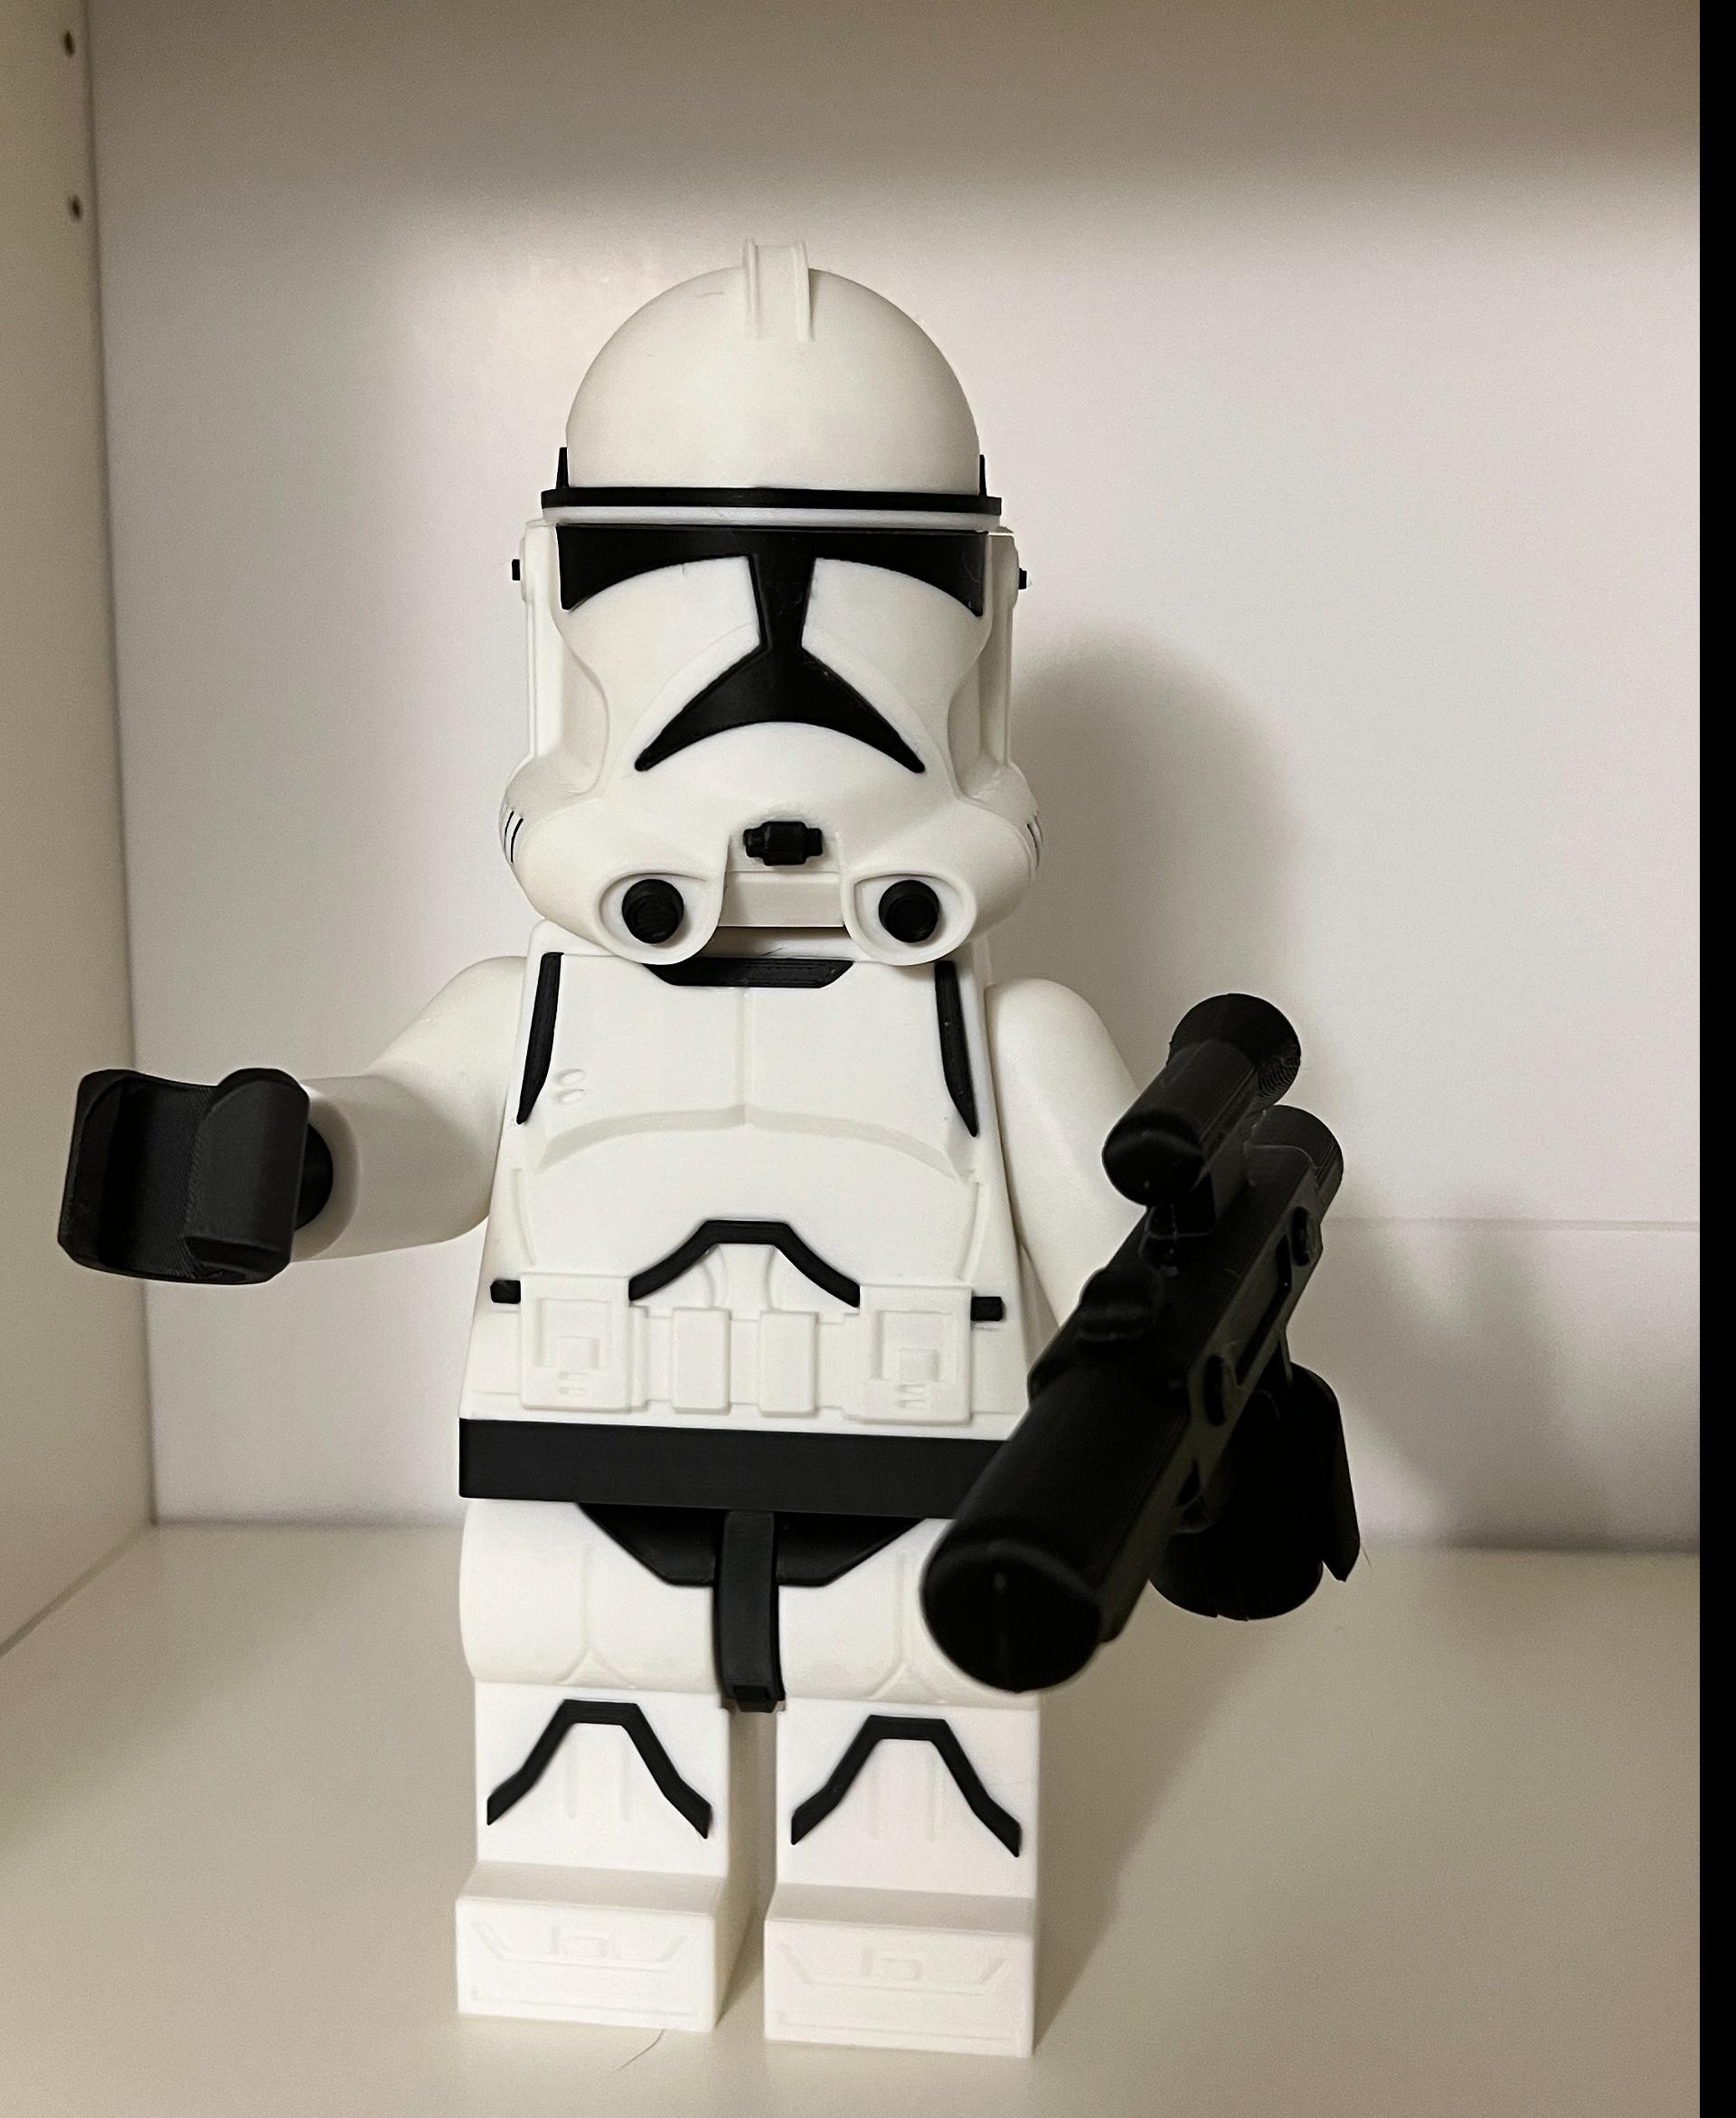 Clone Trooper - Phase II (6:1 LEGO-inspired brick figure, NO MMU/AMS, NO supports, NO glue) - Awesome print, amazing ways to avoid having to use supports - 3d model